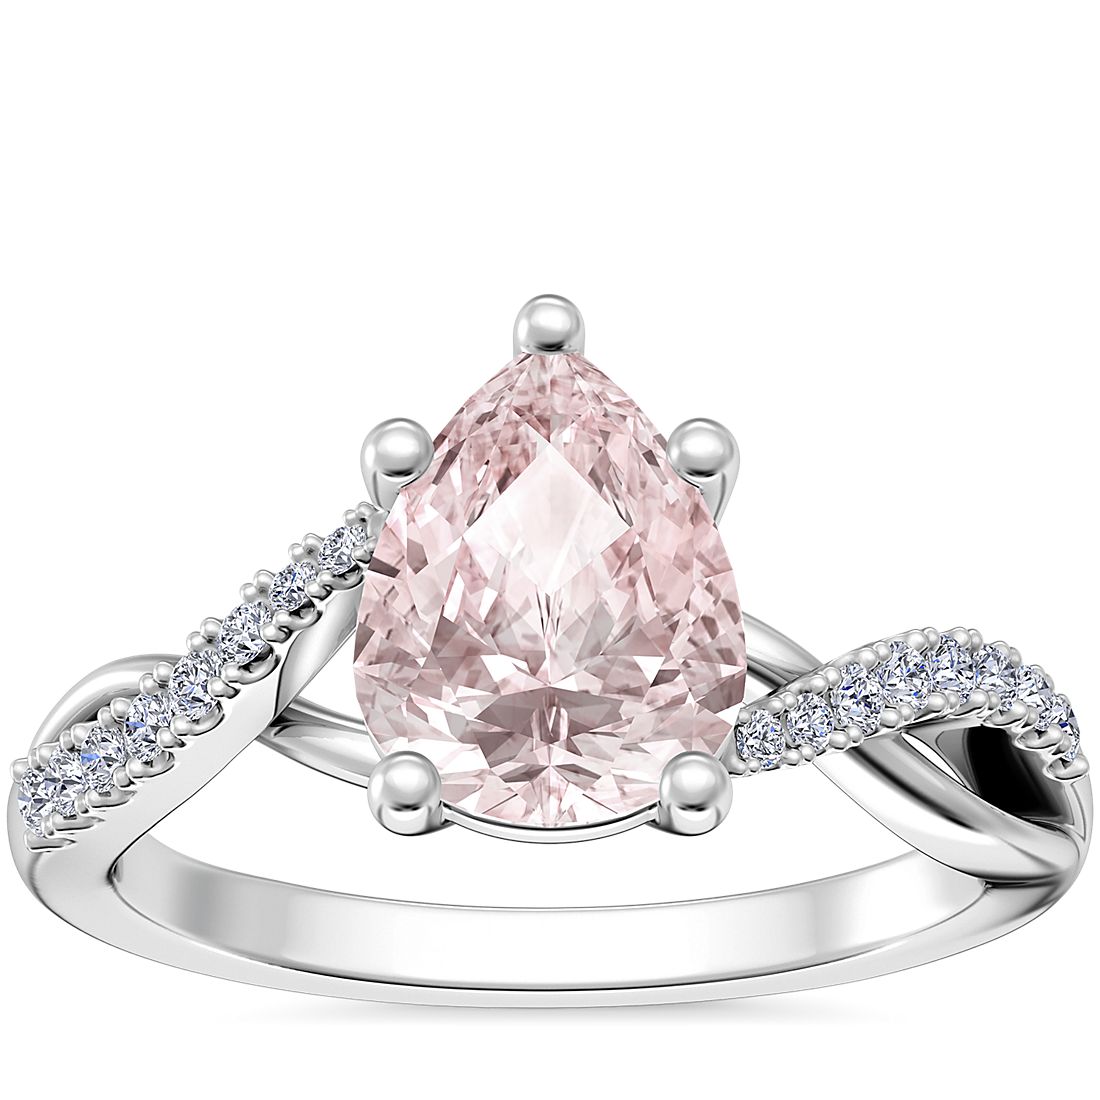 Classic Petite Twist Diamond Engagement Ring with Pear-Shaped Morganite in 18k White Gold (8x6mm)